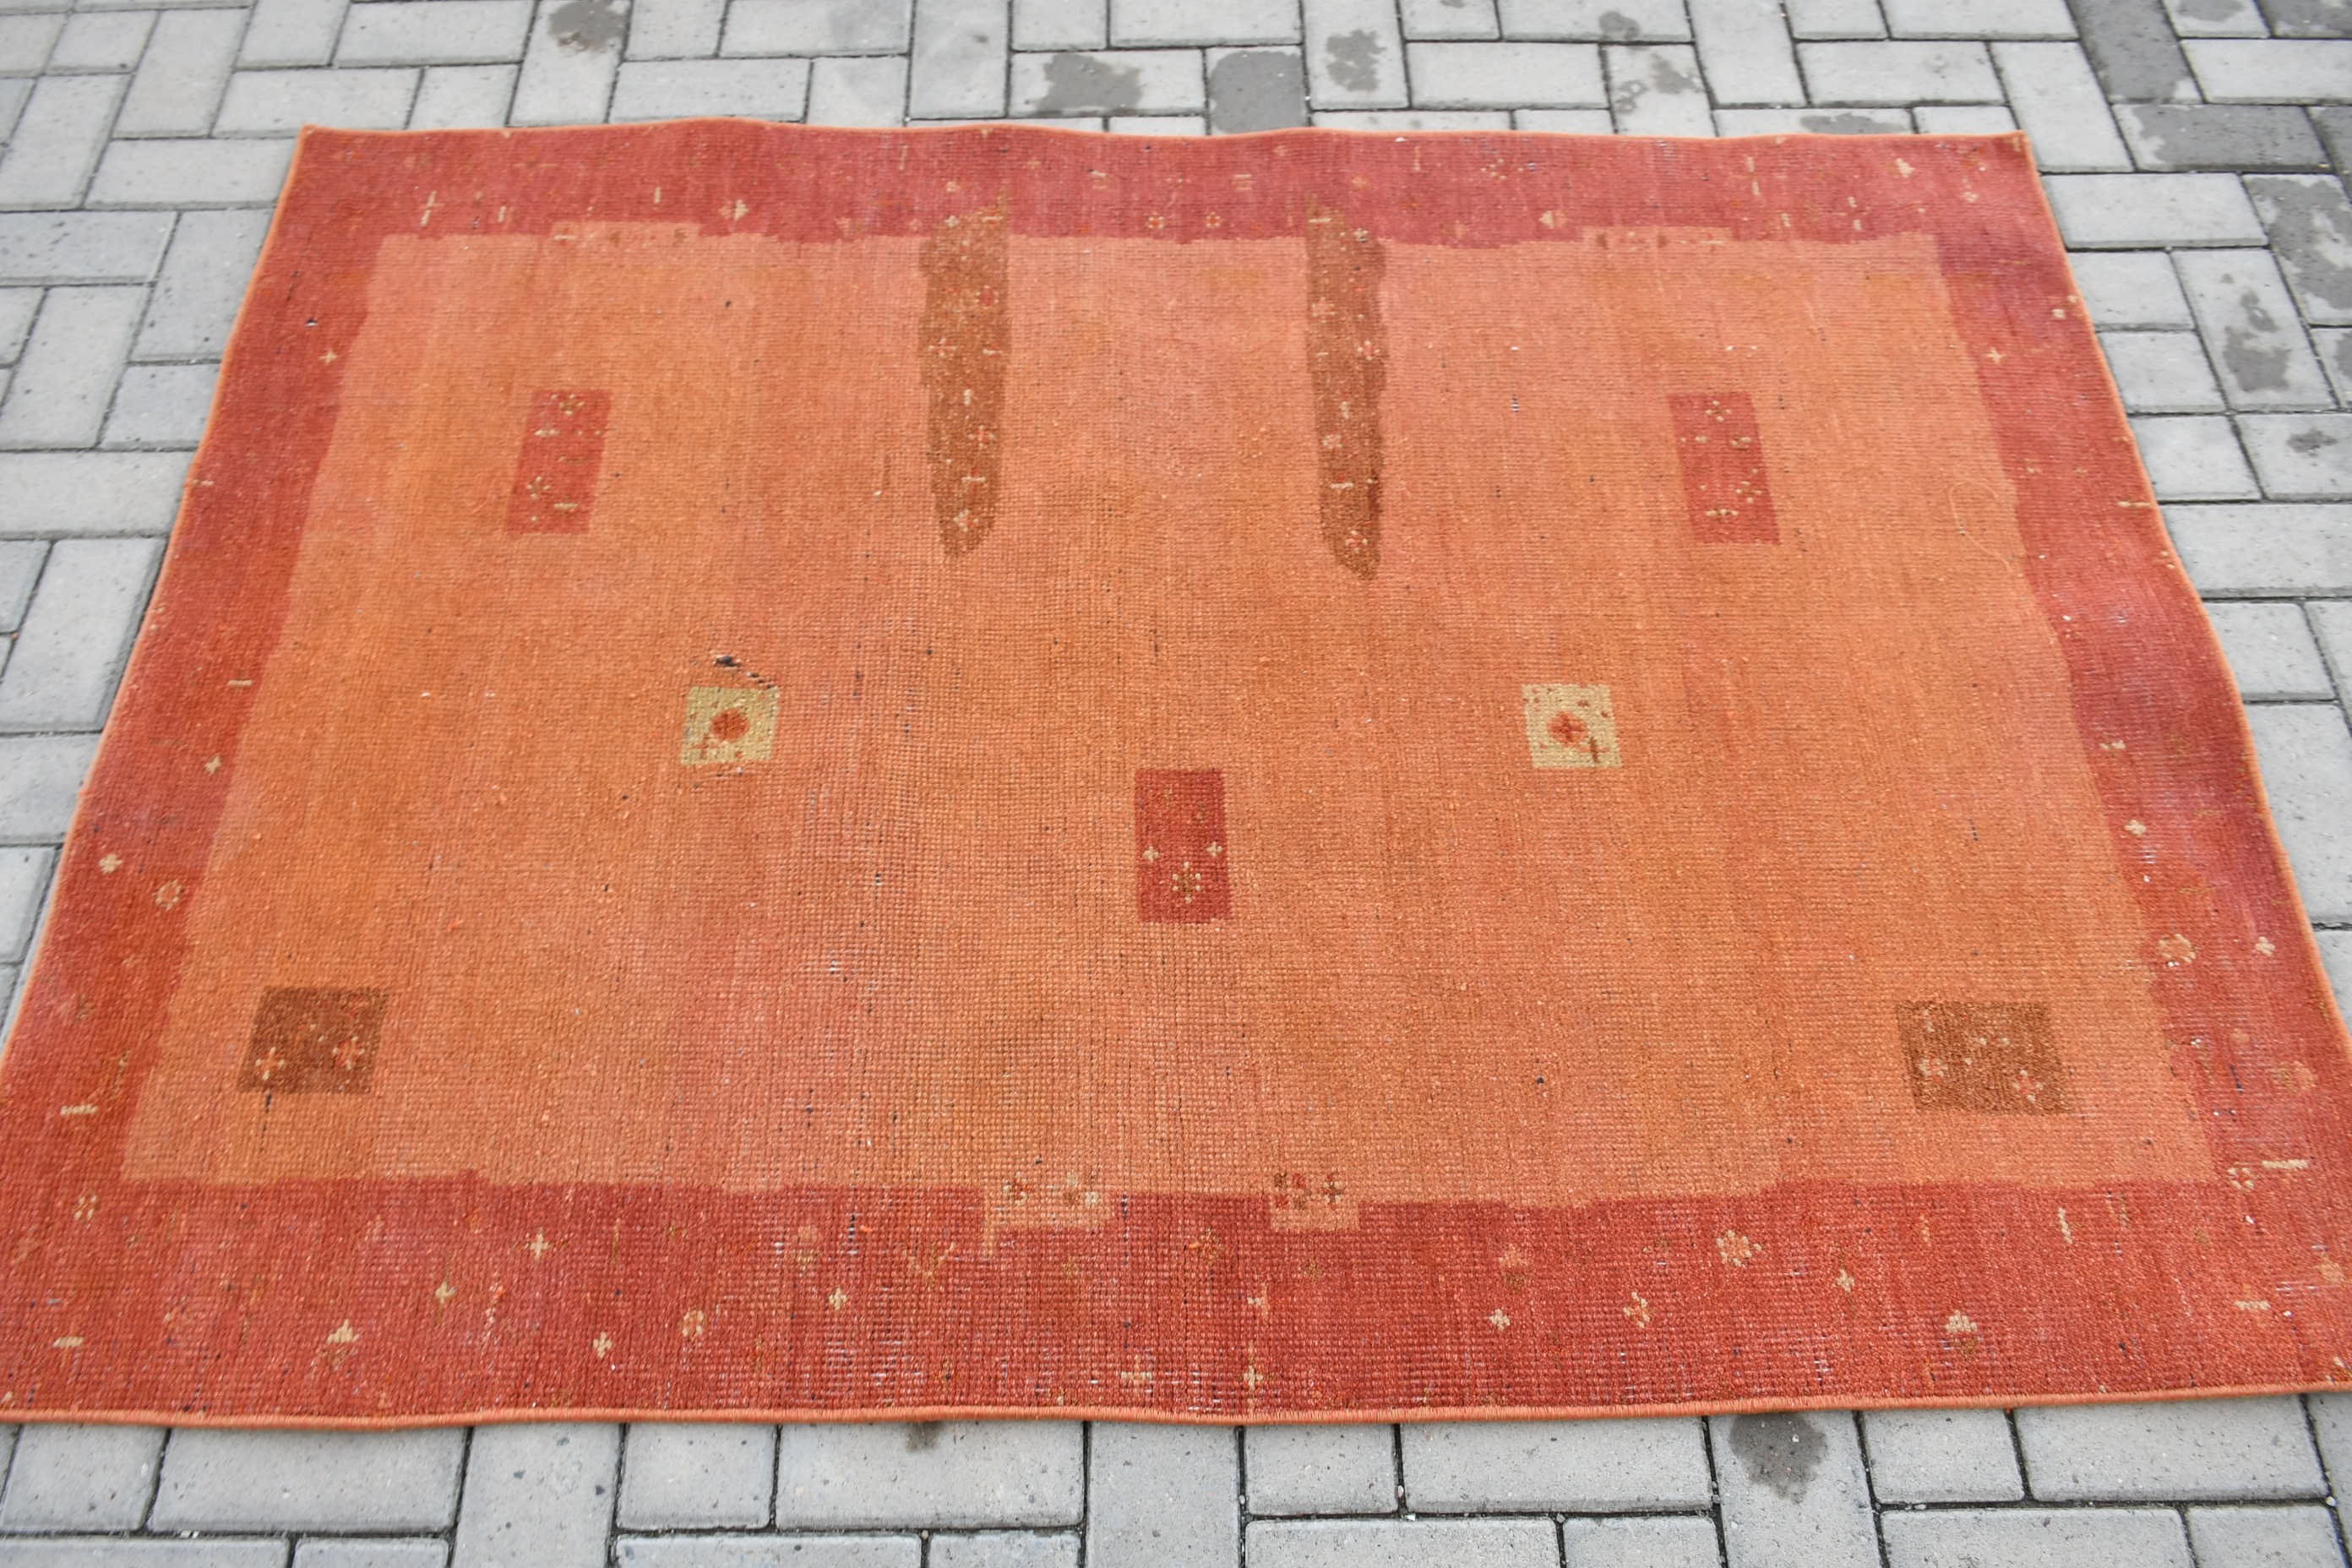 Antique Rugs, Vintage Rug, Rugs for Entry, Orange Kitchen Rugs, Bedroom Rugs, Muted Rug, 4.1x5.6 ft Accent Rugs, Oriental Rug, Turkish Rugs